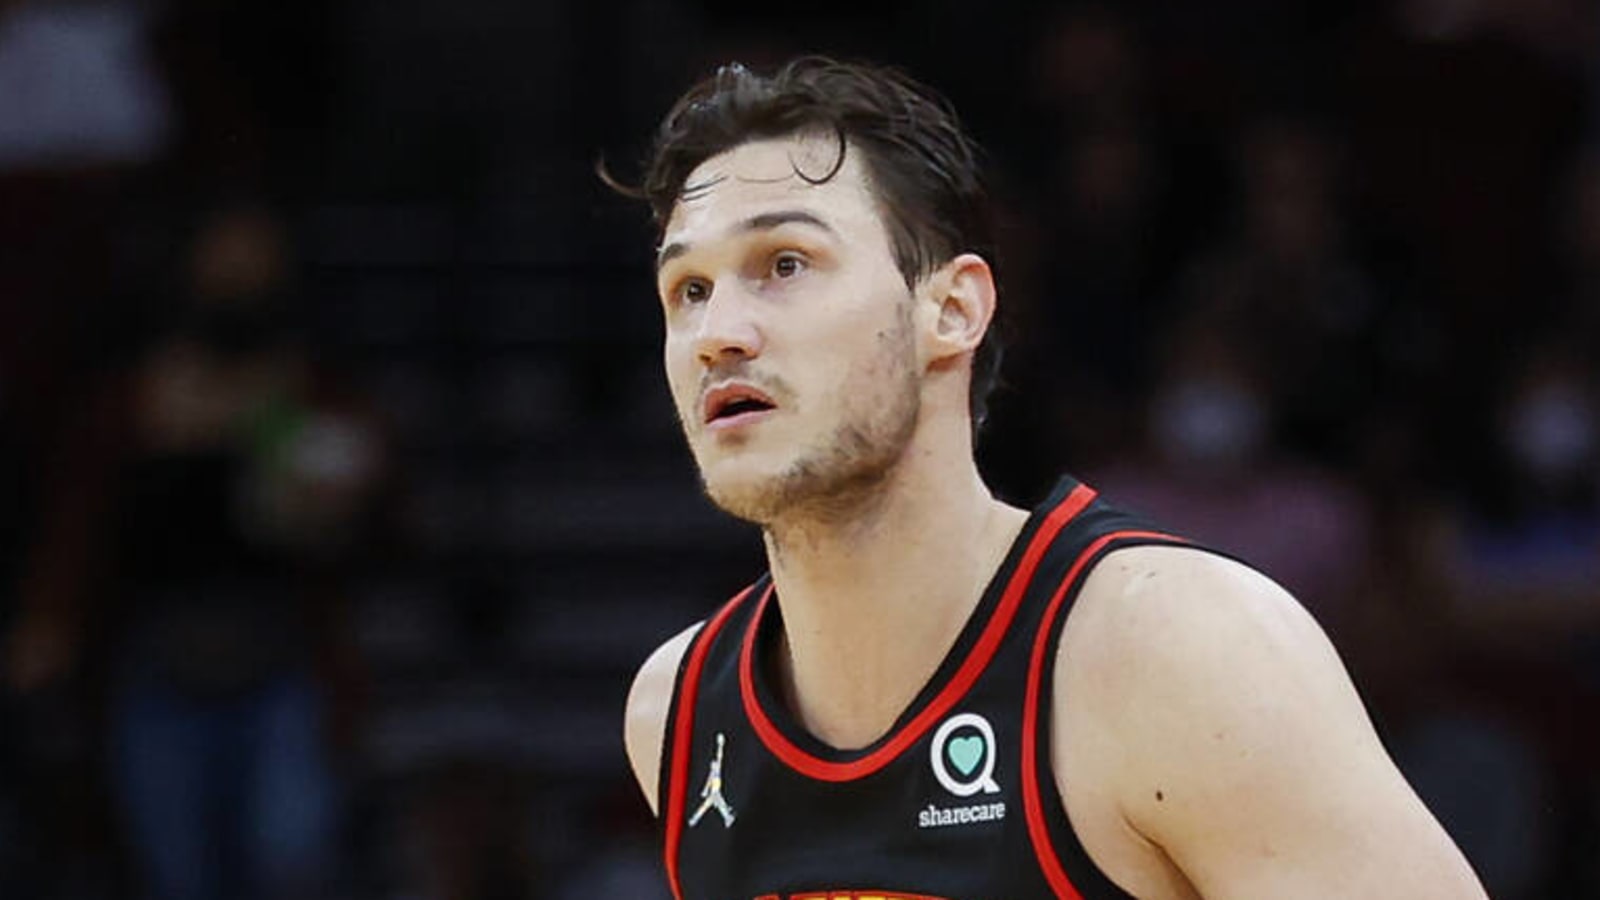 Watch: Celtics' Danilo Gallinari feared to have suffered serious knee injury